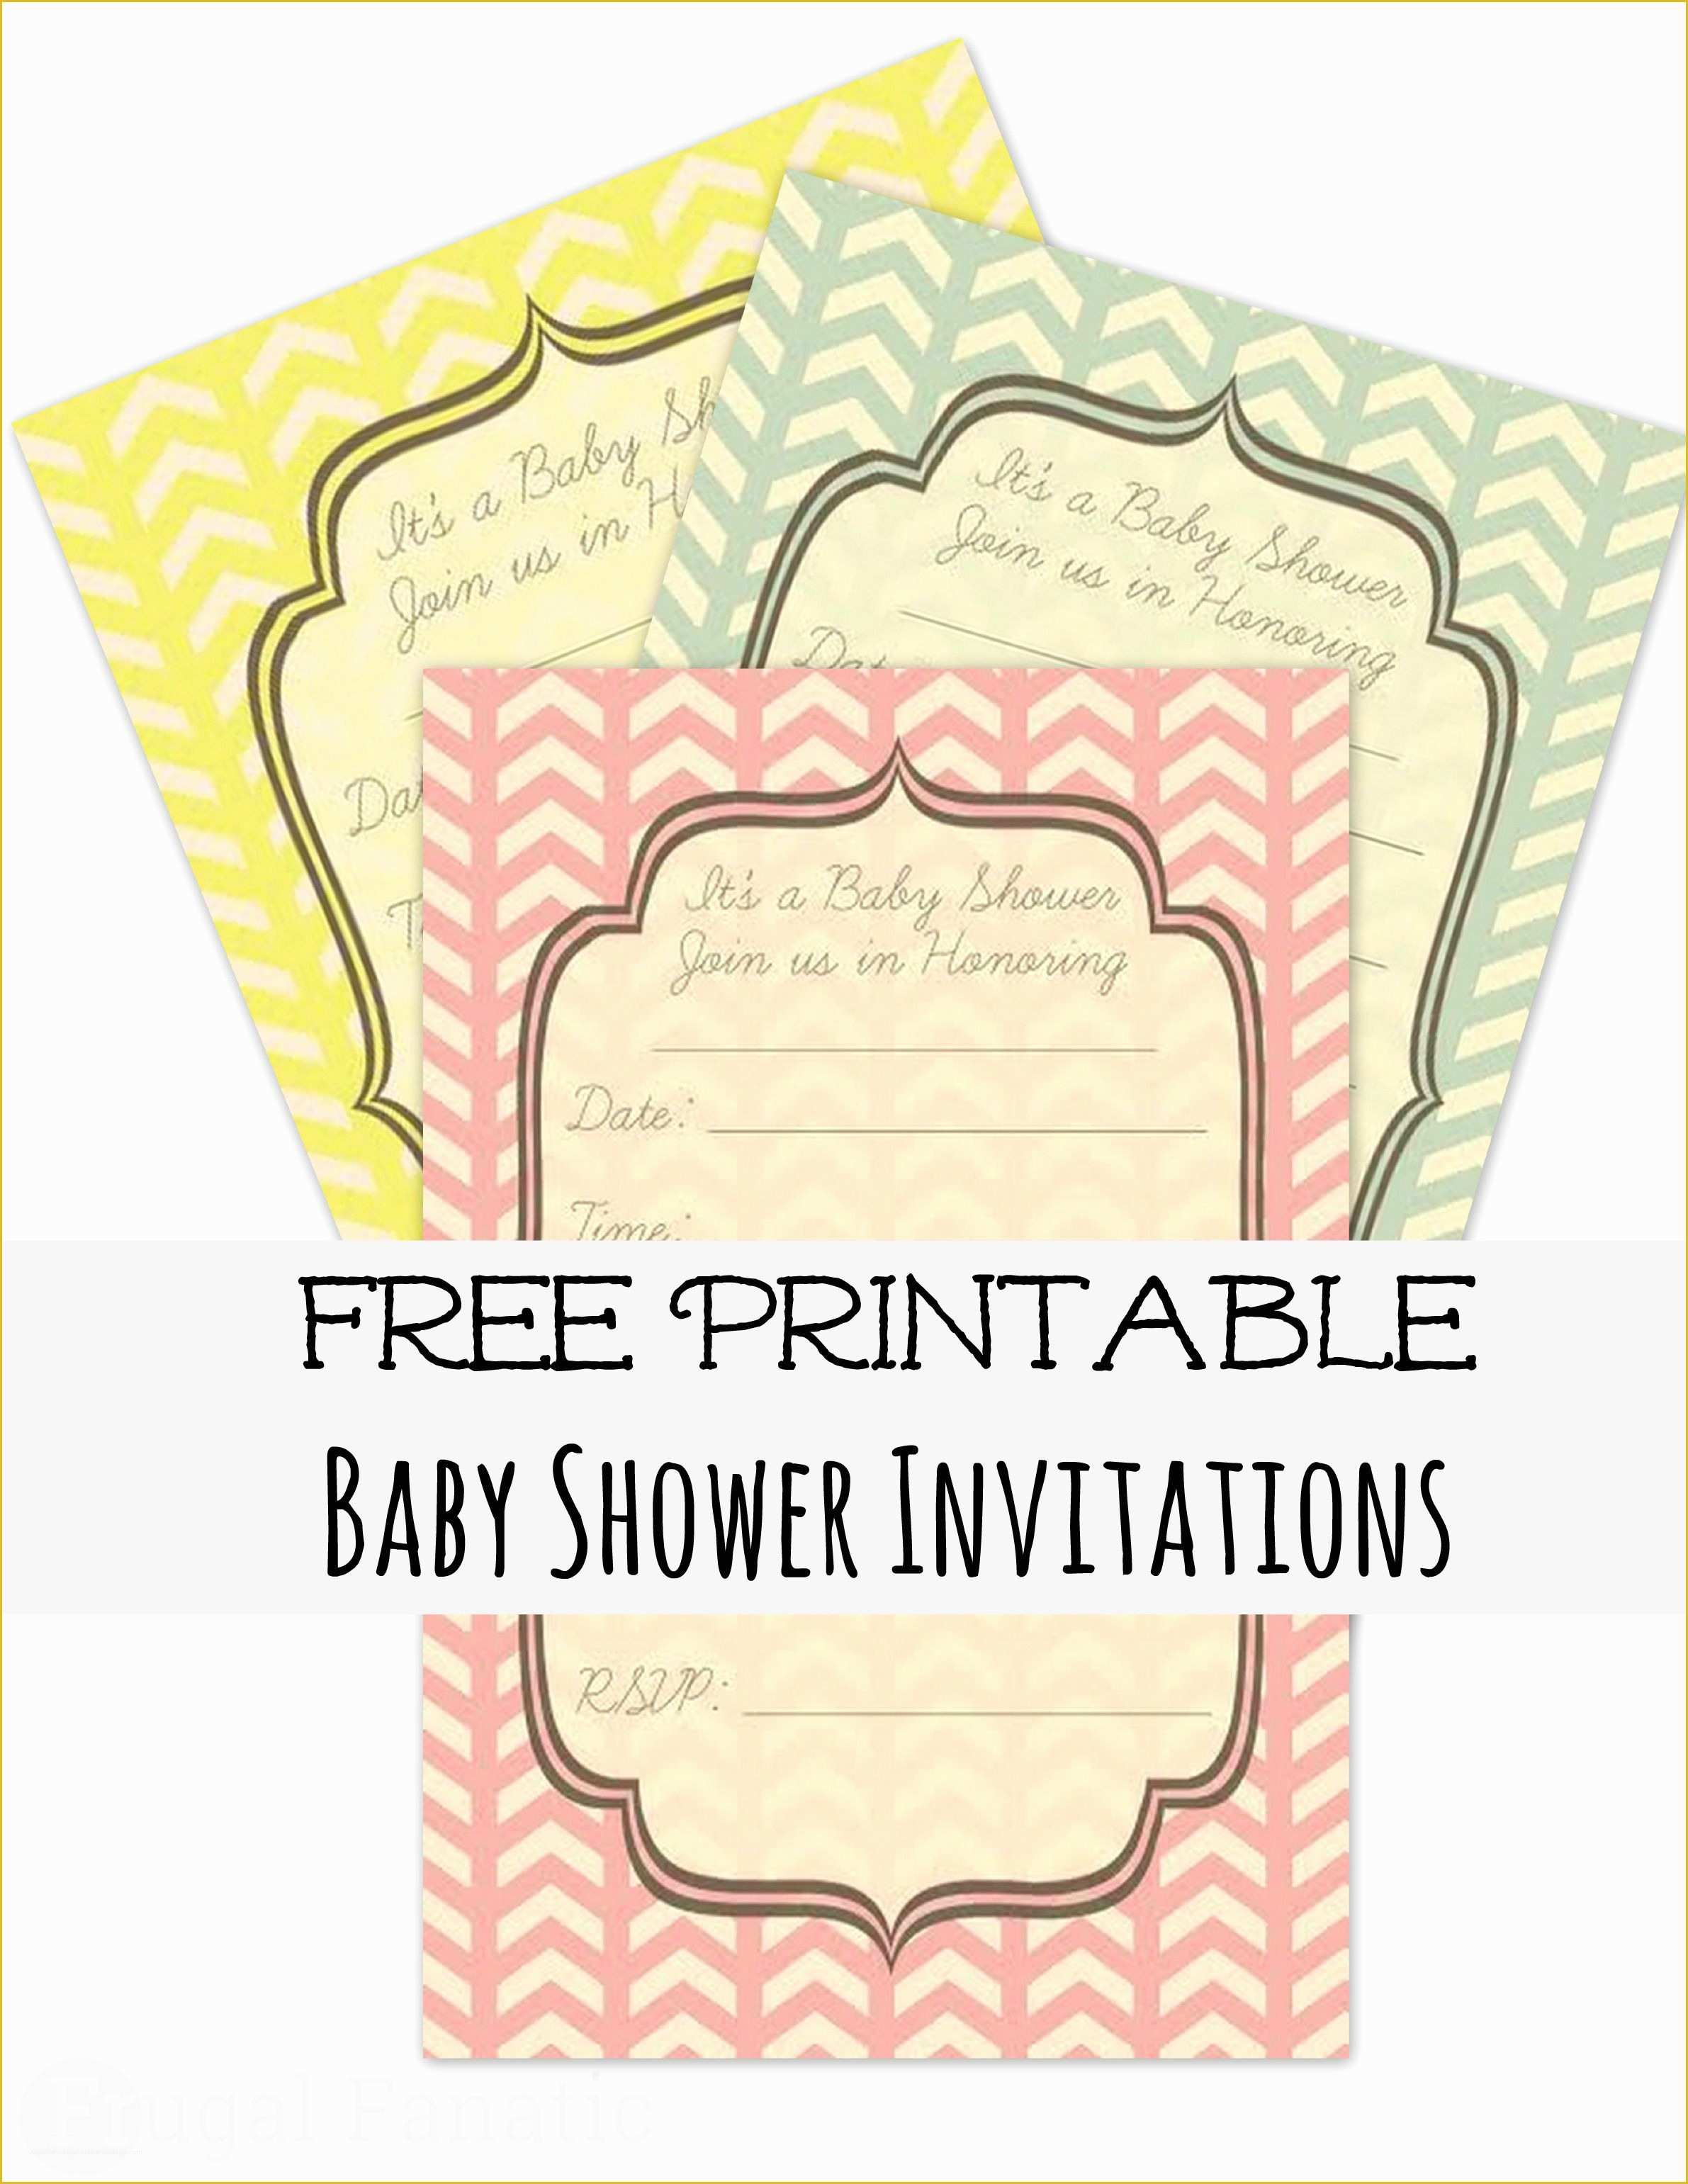 Free Baby Shower Invitation Templates for Word Of Baby Shower Invitation Free Baby Shower Invitation